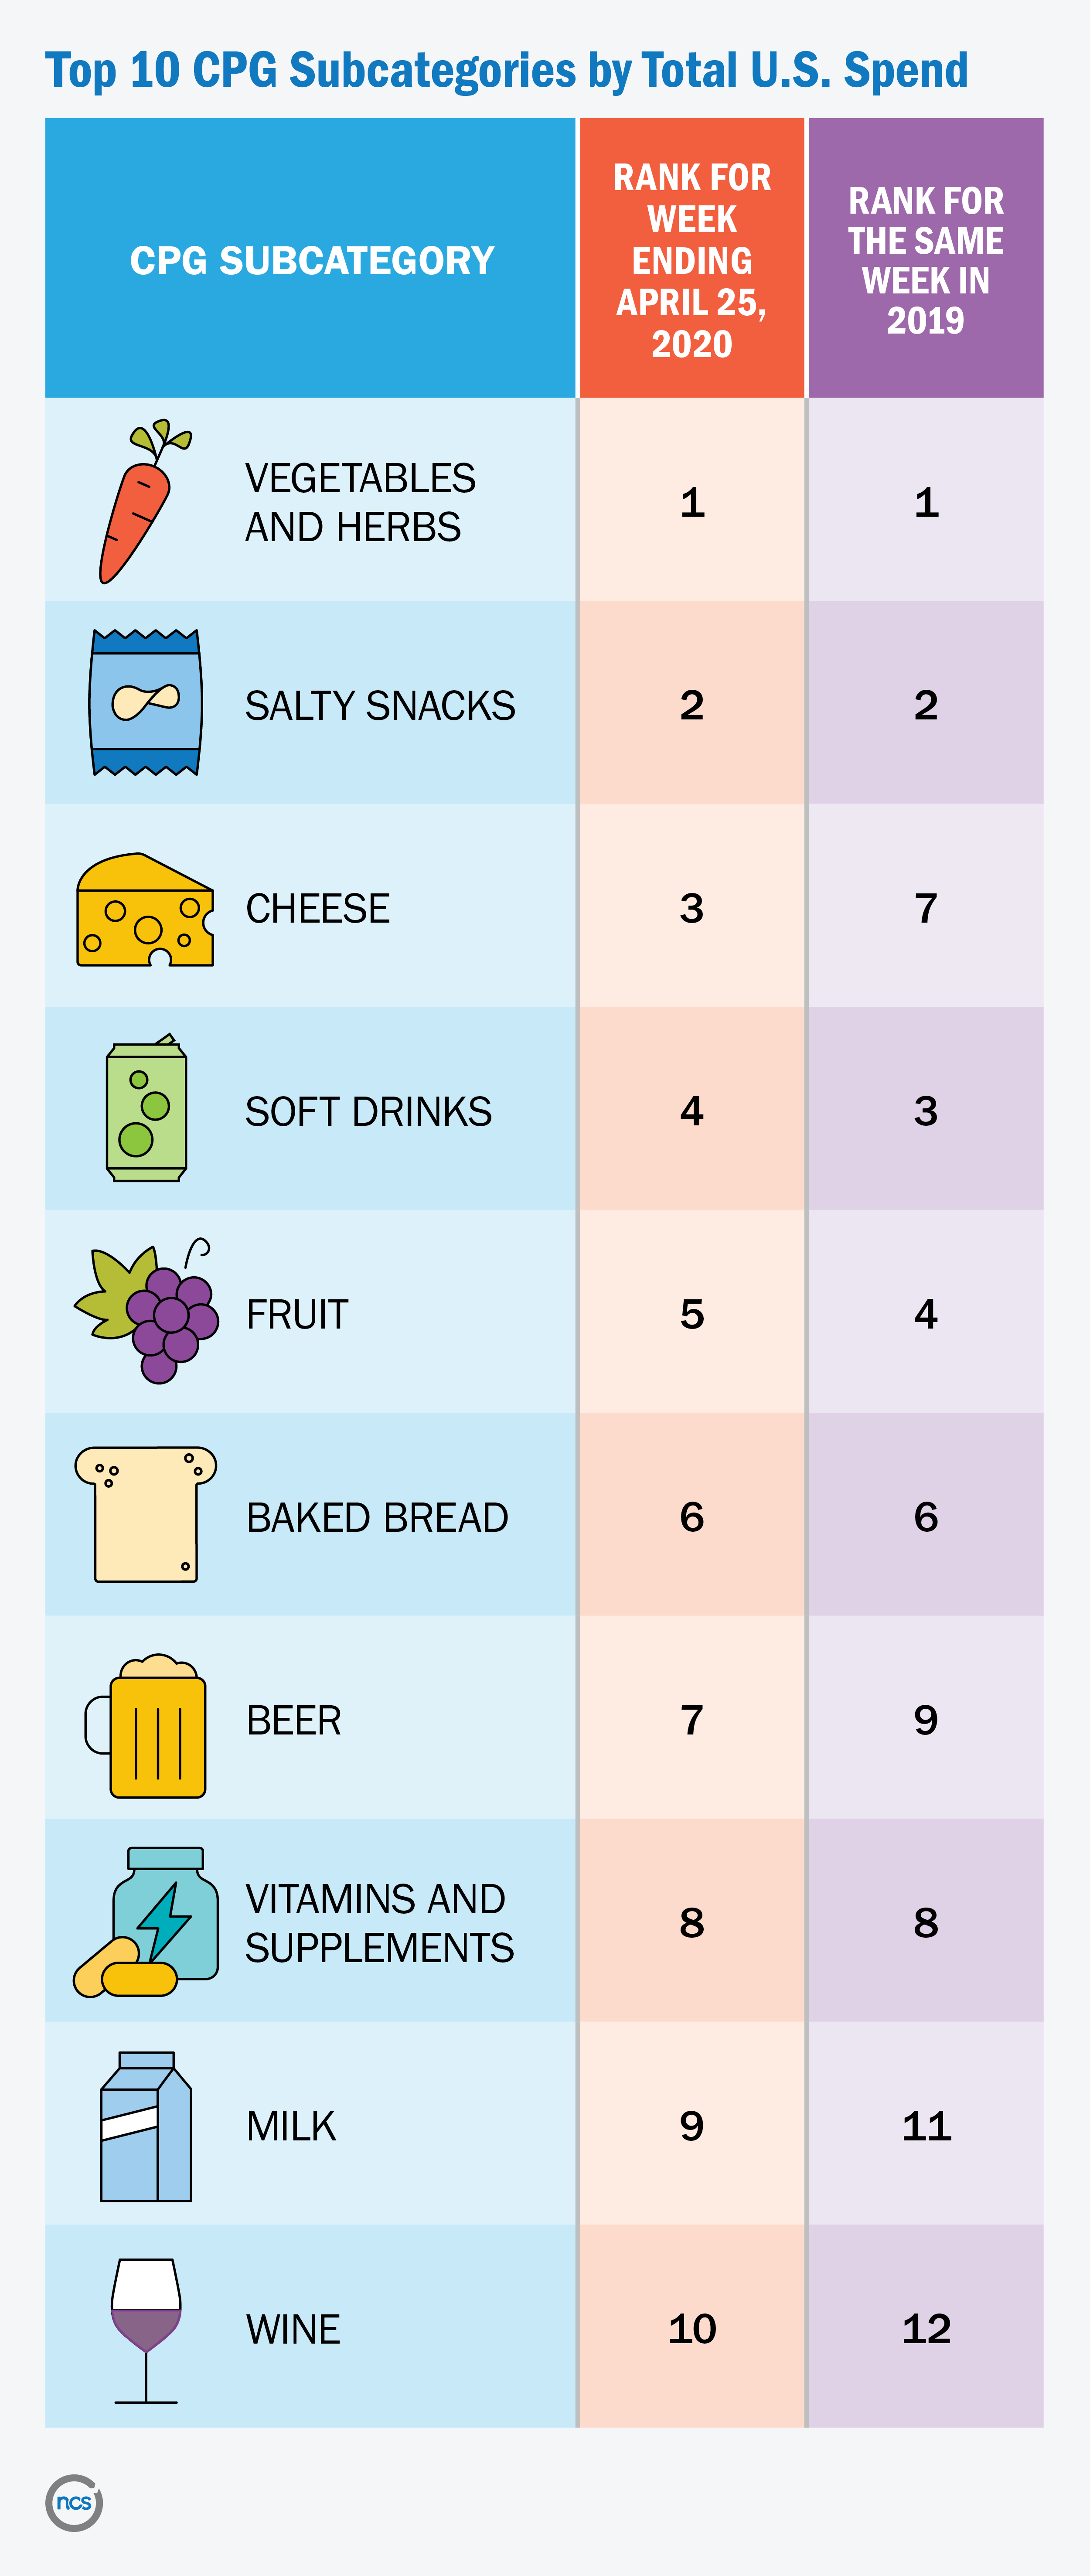 Top 10 CPG subcategories by total U.S. spend for the week ending 4/25/20 include vegetables, salty snacks, cheese, soft drinks and fruit.